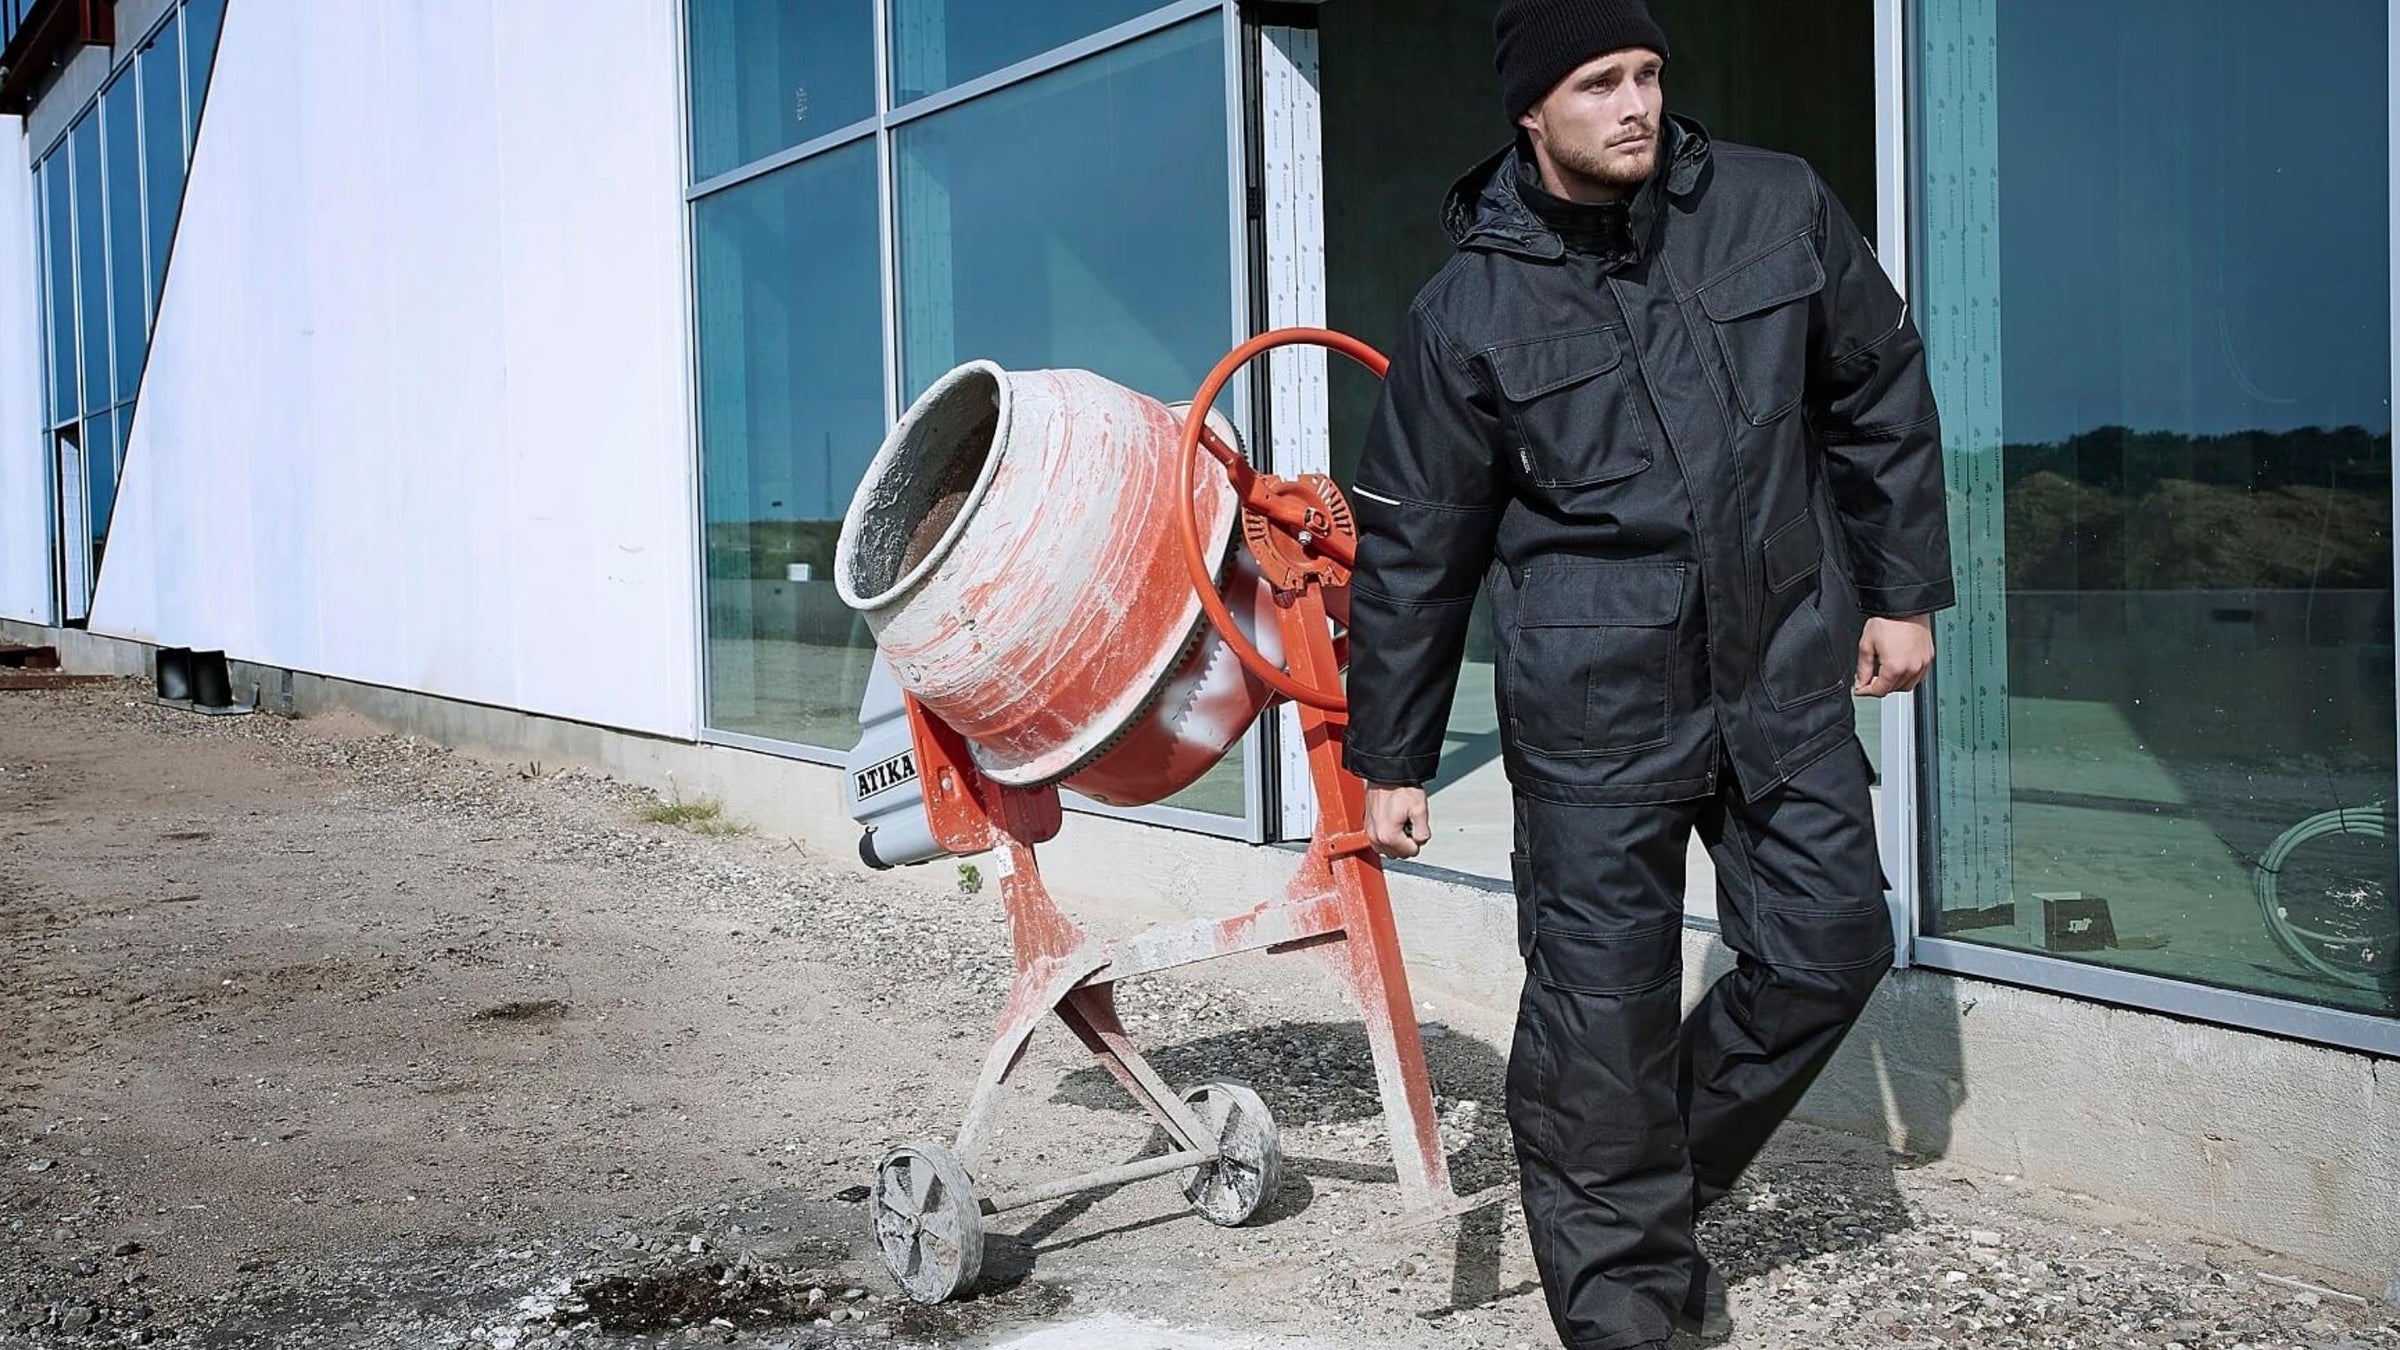 Winter workwear from Snickers Workwear - Professional Builder